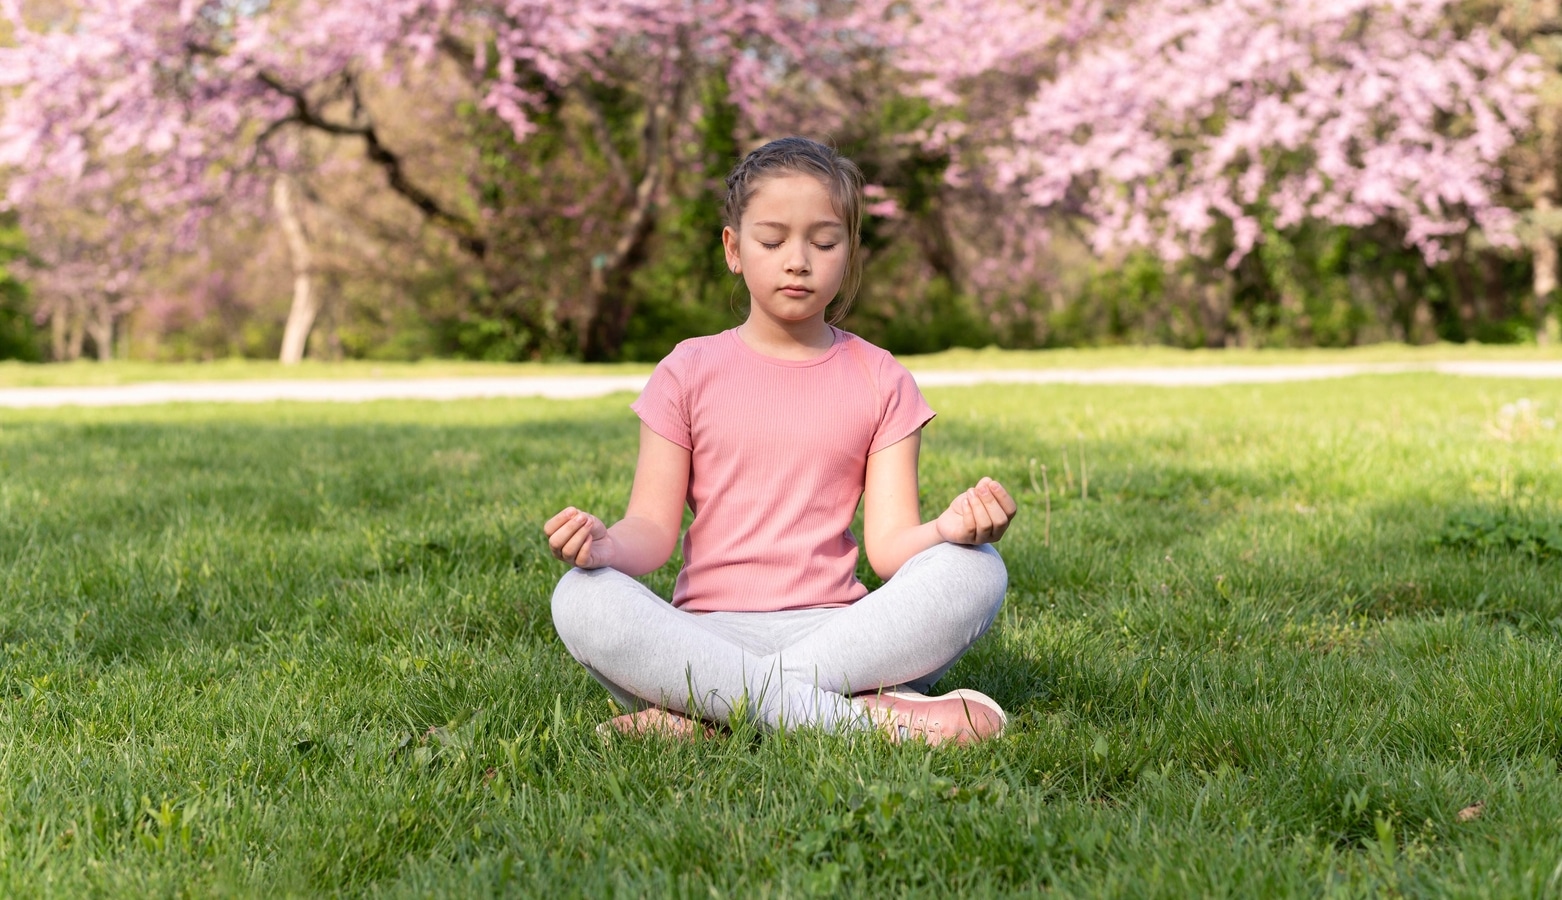 Yoga For Kids With Their Benefits - Herbkart